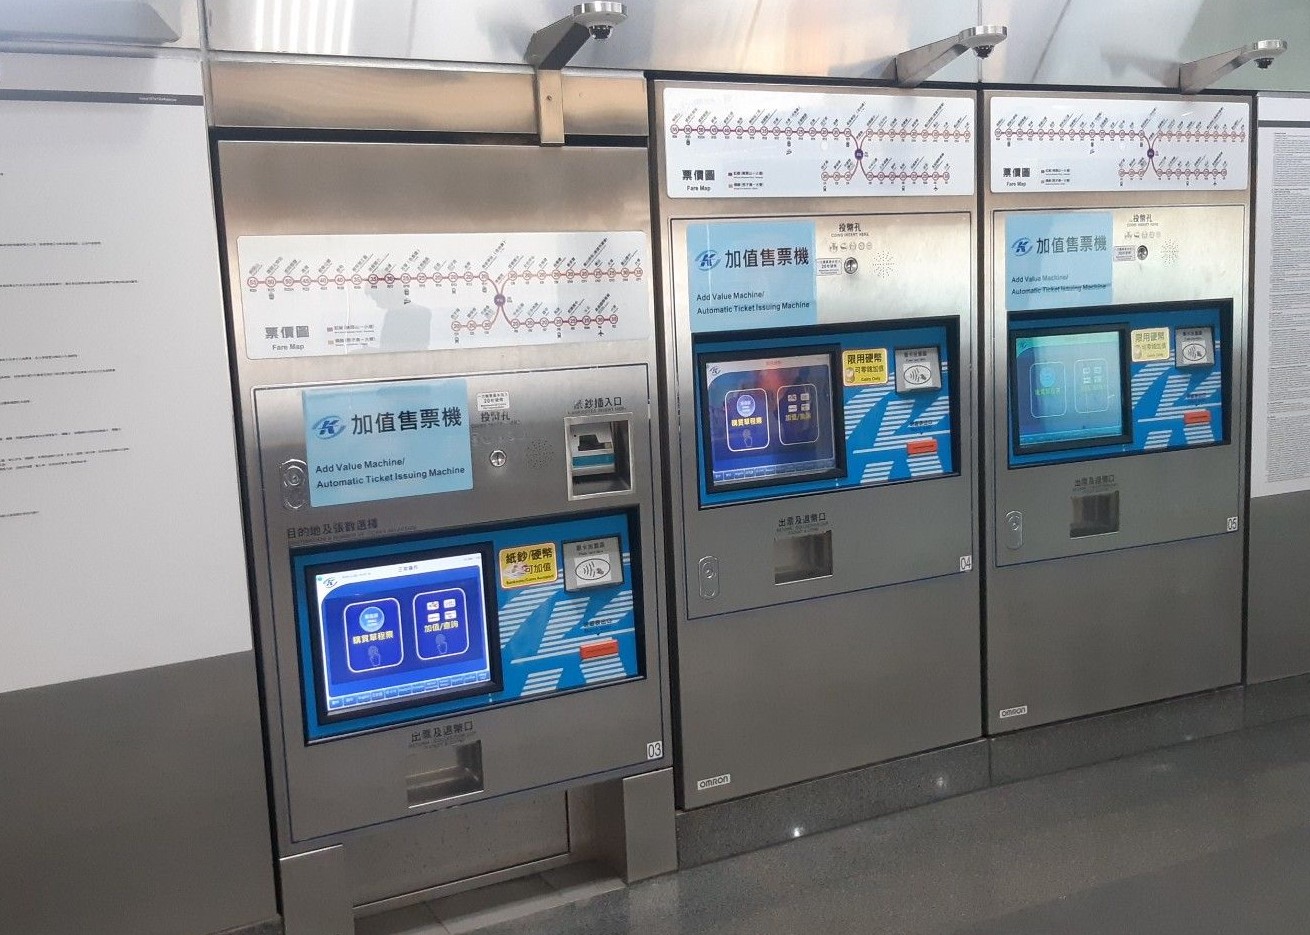 Wheelchair Accessible Add Value/Ticket Vending Machine